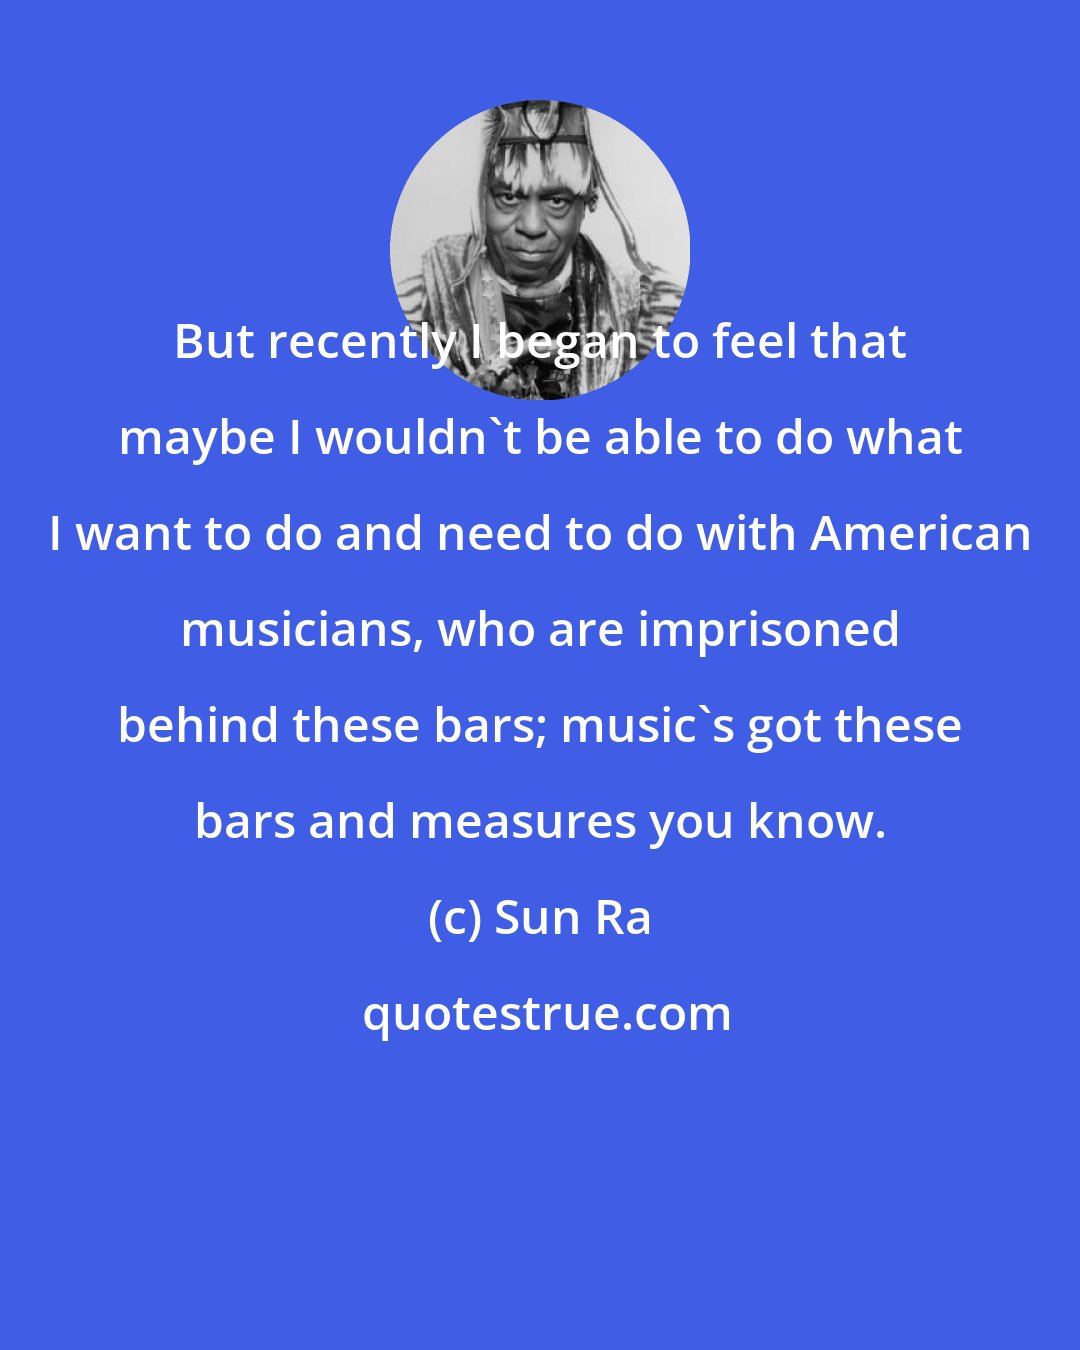 Sun Ra: But recently I began to feel that maybe I wouldn't be able to do what I want to do and need to do with American musicians, who are imprisoned behind these bars; music's got these bars and measures you know.